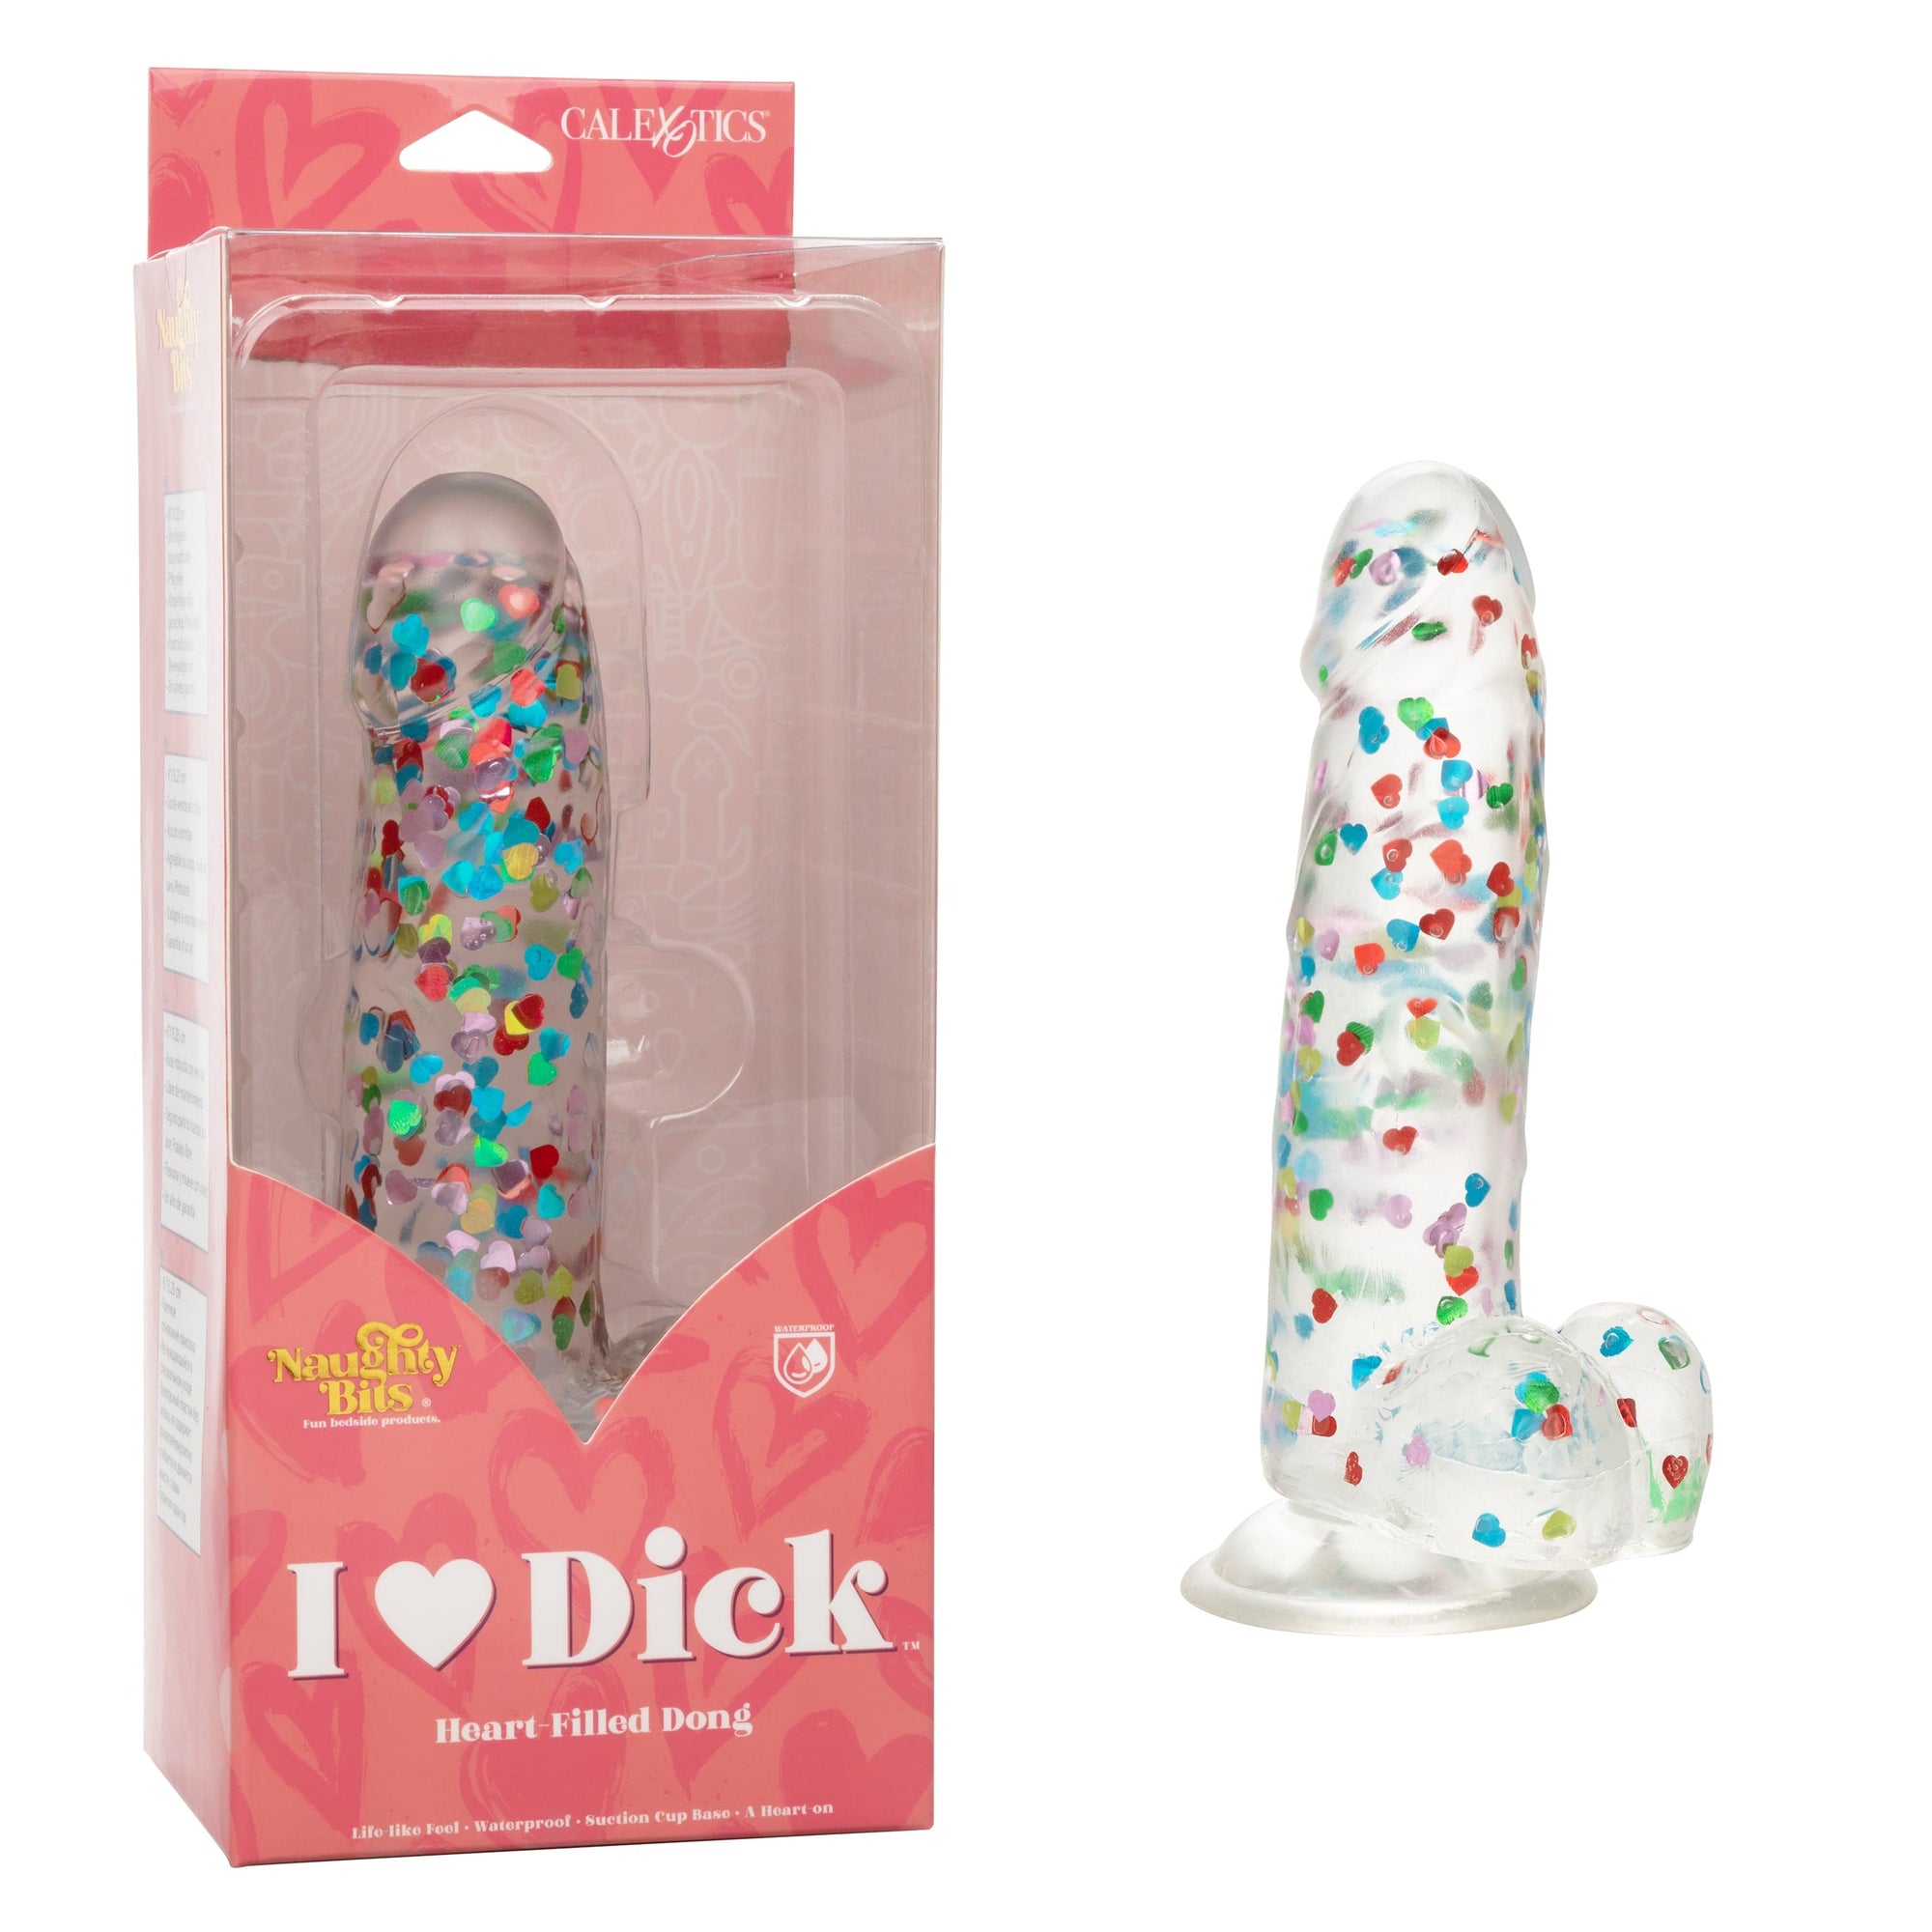 California Exotics - Naughty Bits I Love Dick Heart filled Dong Realistic Dildo with Balls 8" (Clear) Clit Massager (Vibration) Rechargeable 716770101273 CherryAffairs